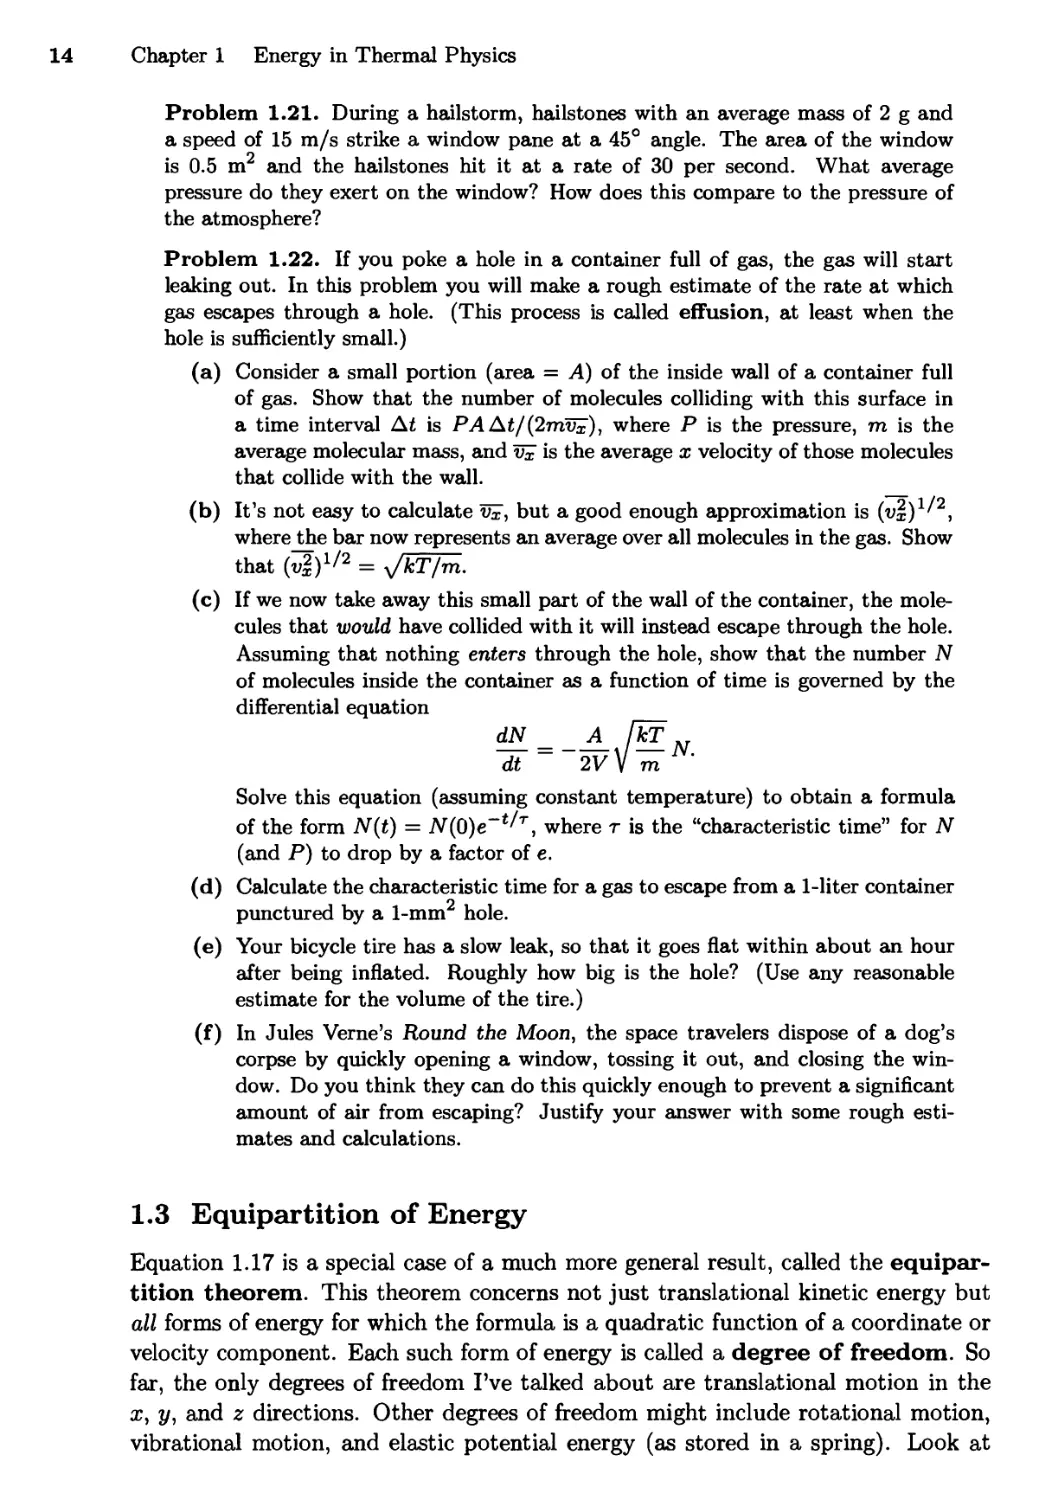 1.3 Equipartition of Energy